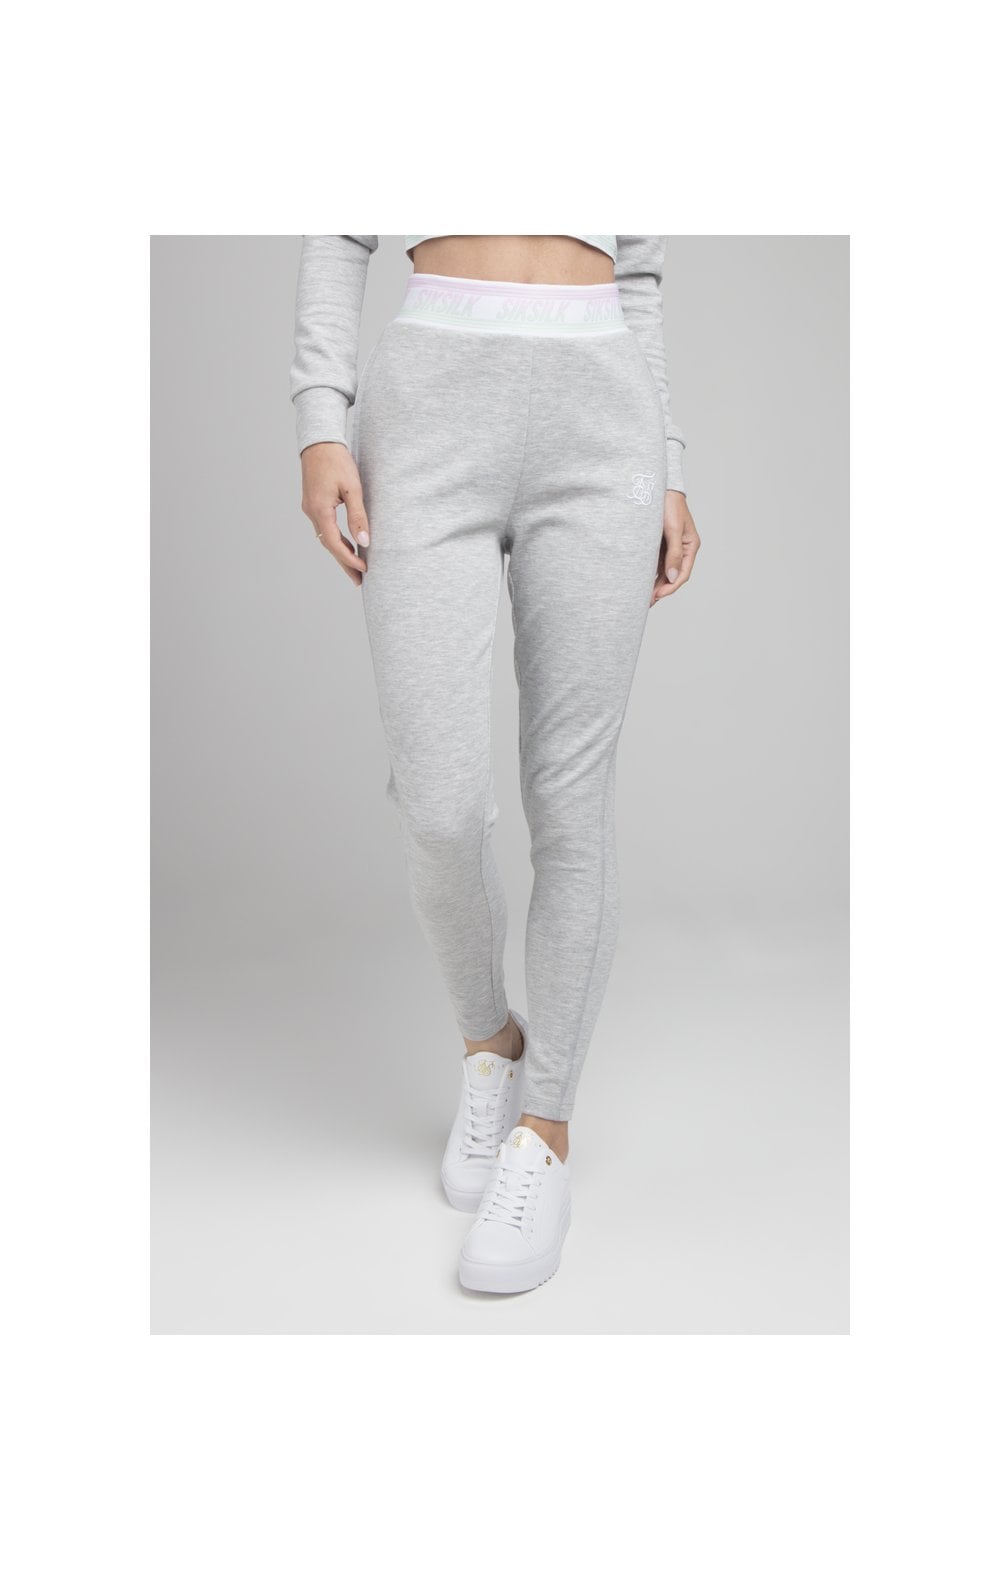 Load image into Gallery viewer, SikSilk Aurora Fade Track Pants - Grey Marl (1)